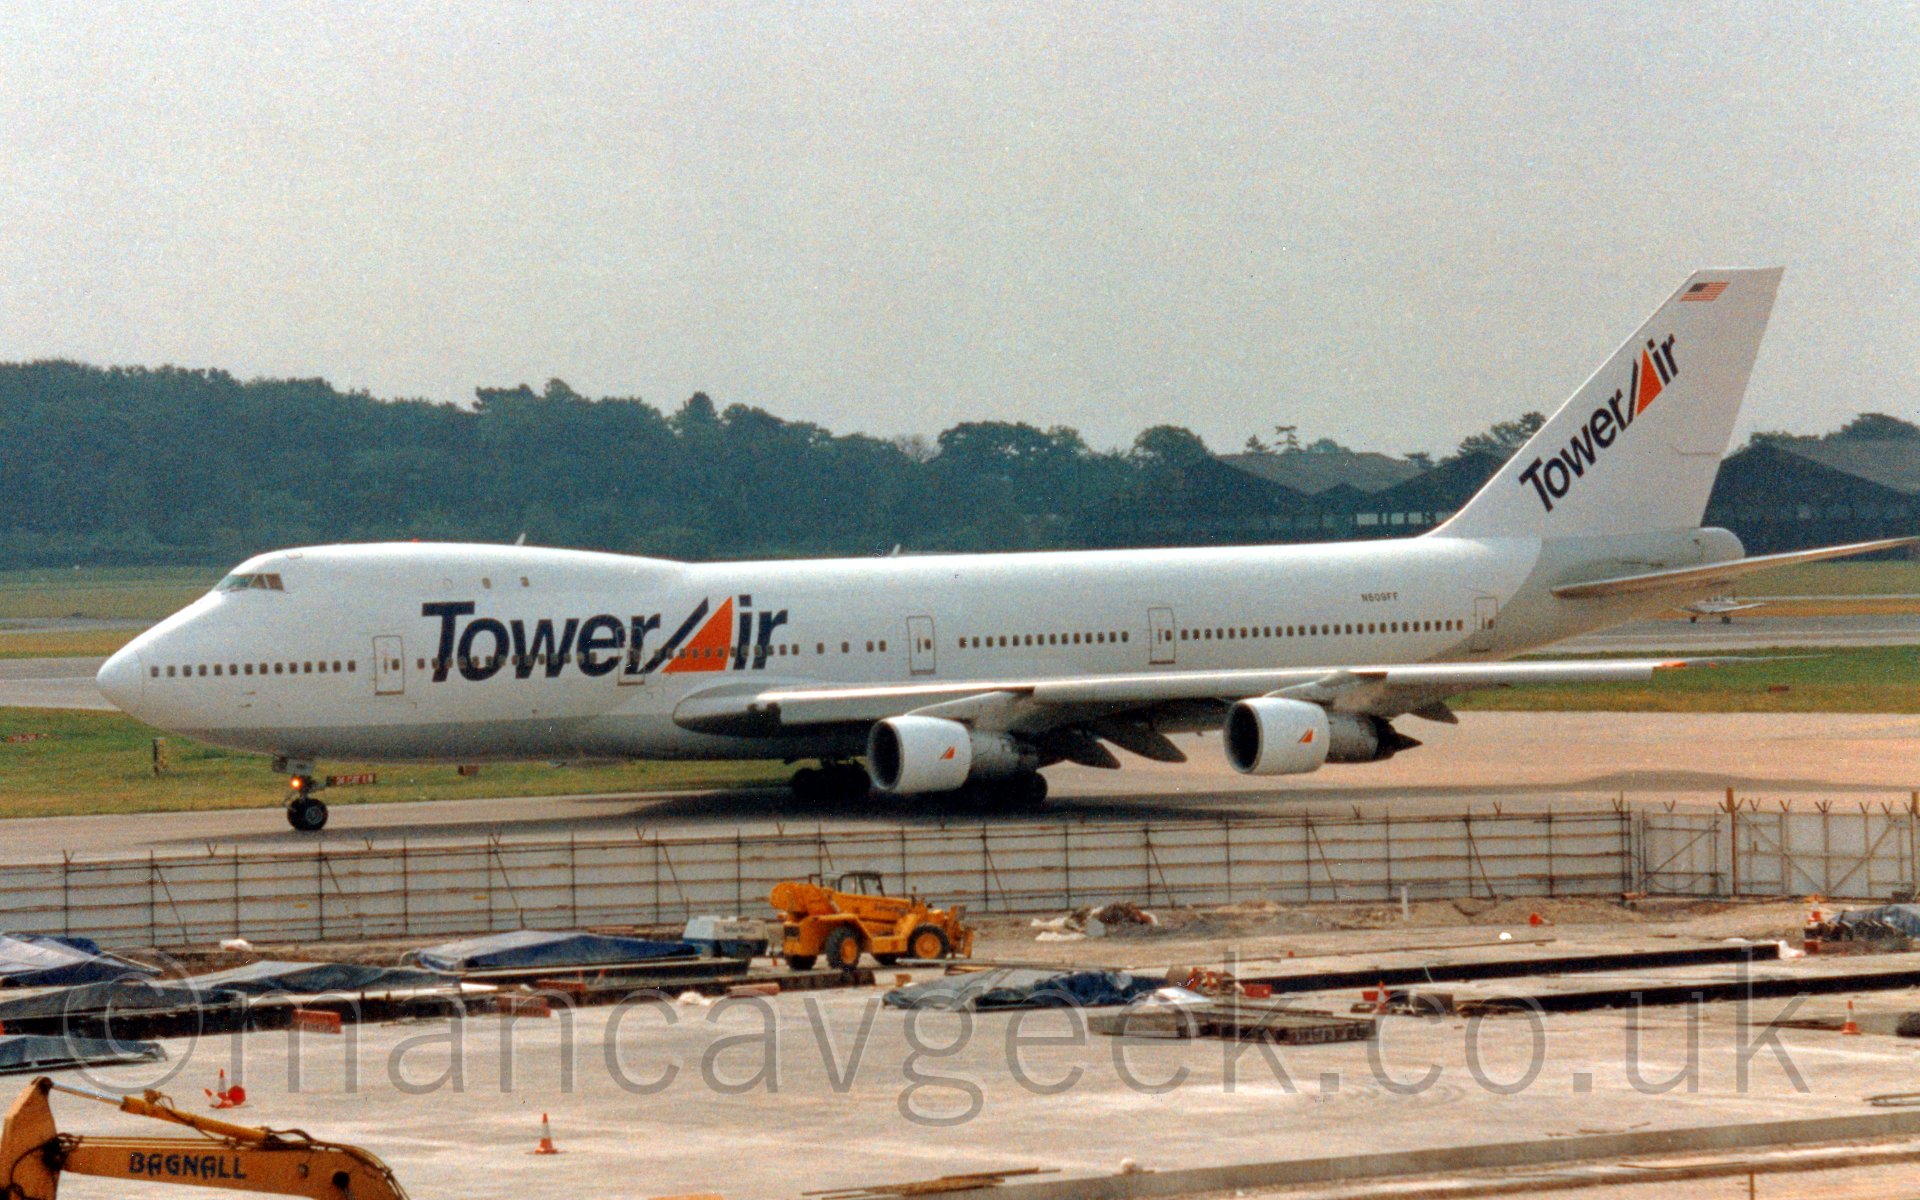 Side view of a very large 4 engined jet airliner taxiing from left to right. The plane is mostly white, with a silver belly, and large "TowerAir" titles on the forward fuselage, with the centre of the "A" in "Air" being a large orange triangle. The same titles are painted diagonally on the tail. In the foreground, a large area is fenced off, with several yellow constructions vehicles scattered around, on what looks like newly poured areas of concrete. In the background, a large black hangar is on the left of the frame behind the tail, while trees fill the skyline on the rest of the frame. Above, the sky is a bright, hazy grey.